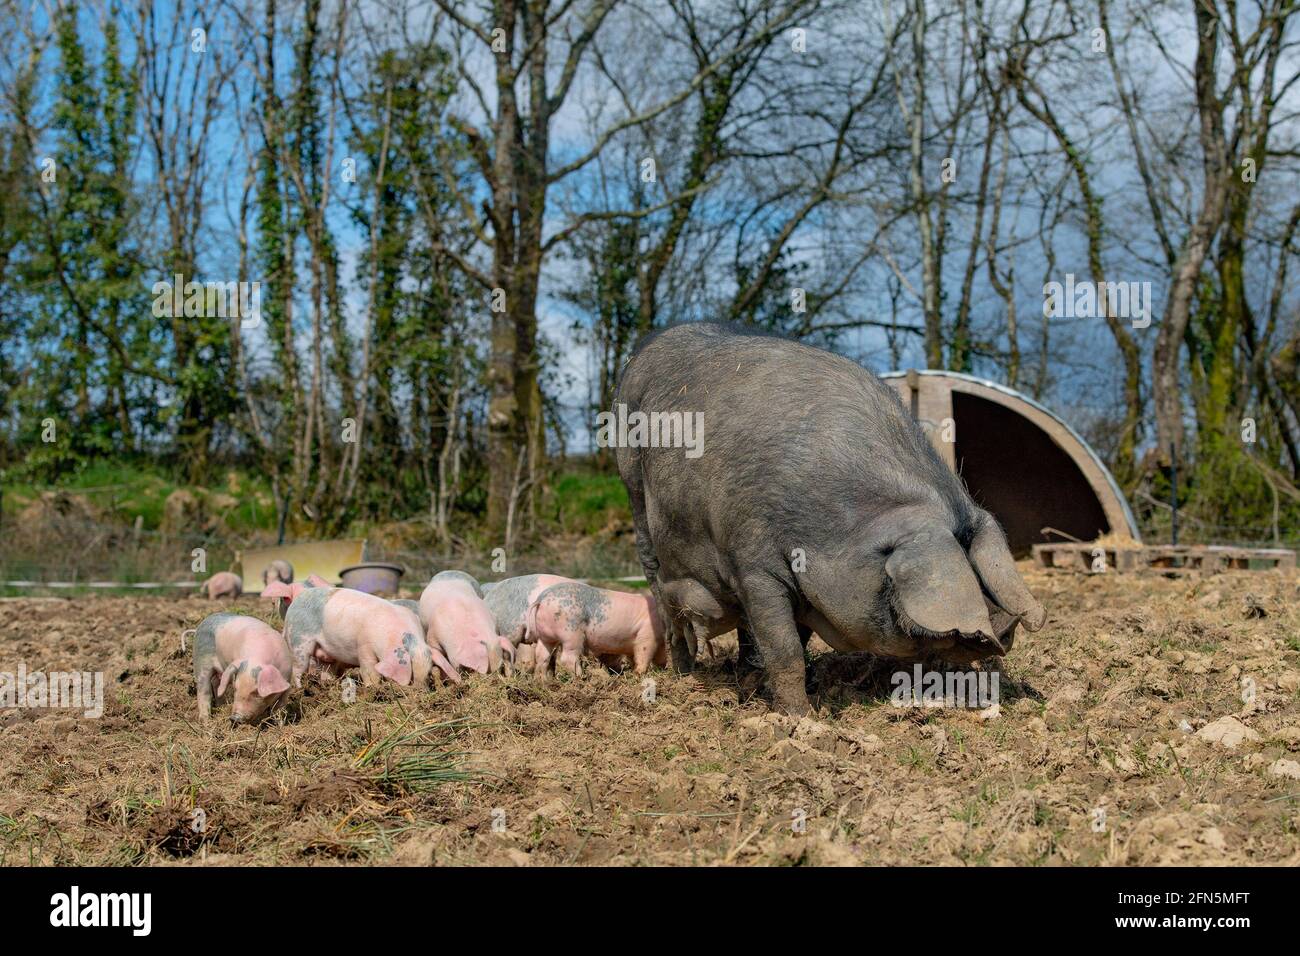 large black pig with her piglets Stock Photo